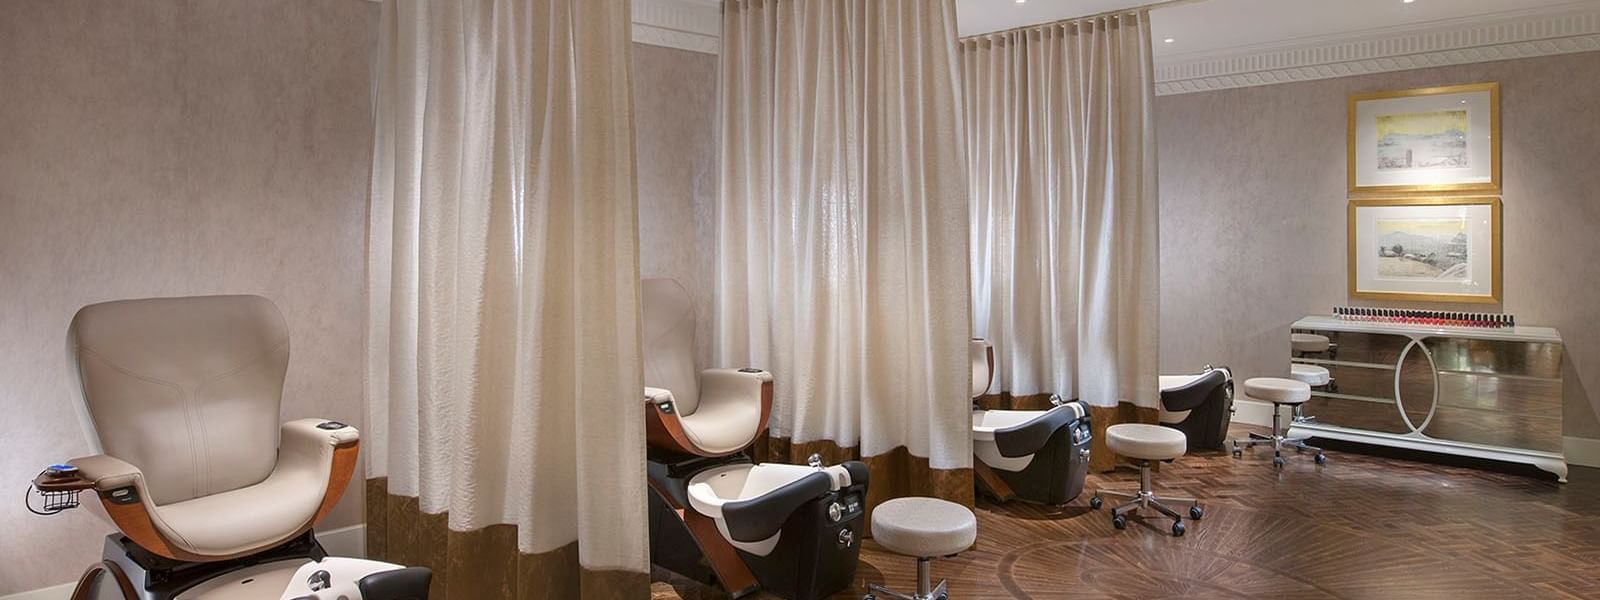 Pedicure chairs in Crown Spa Salon at Crown Hotel Melbourne